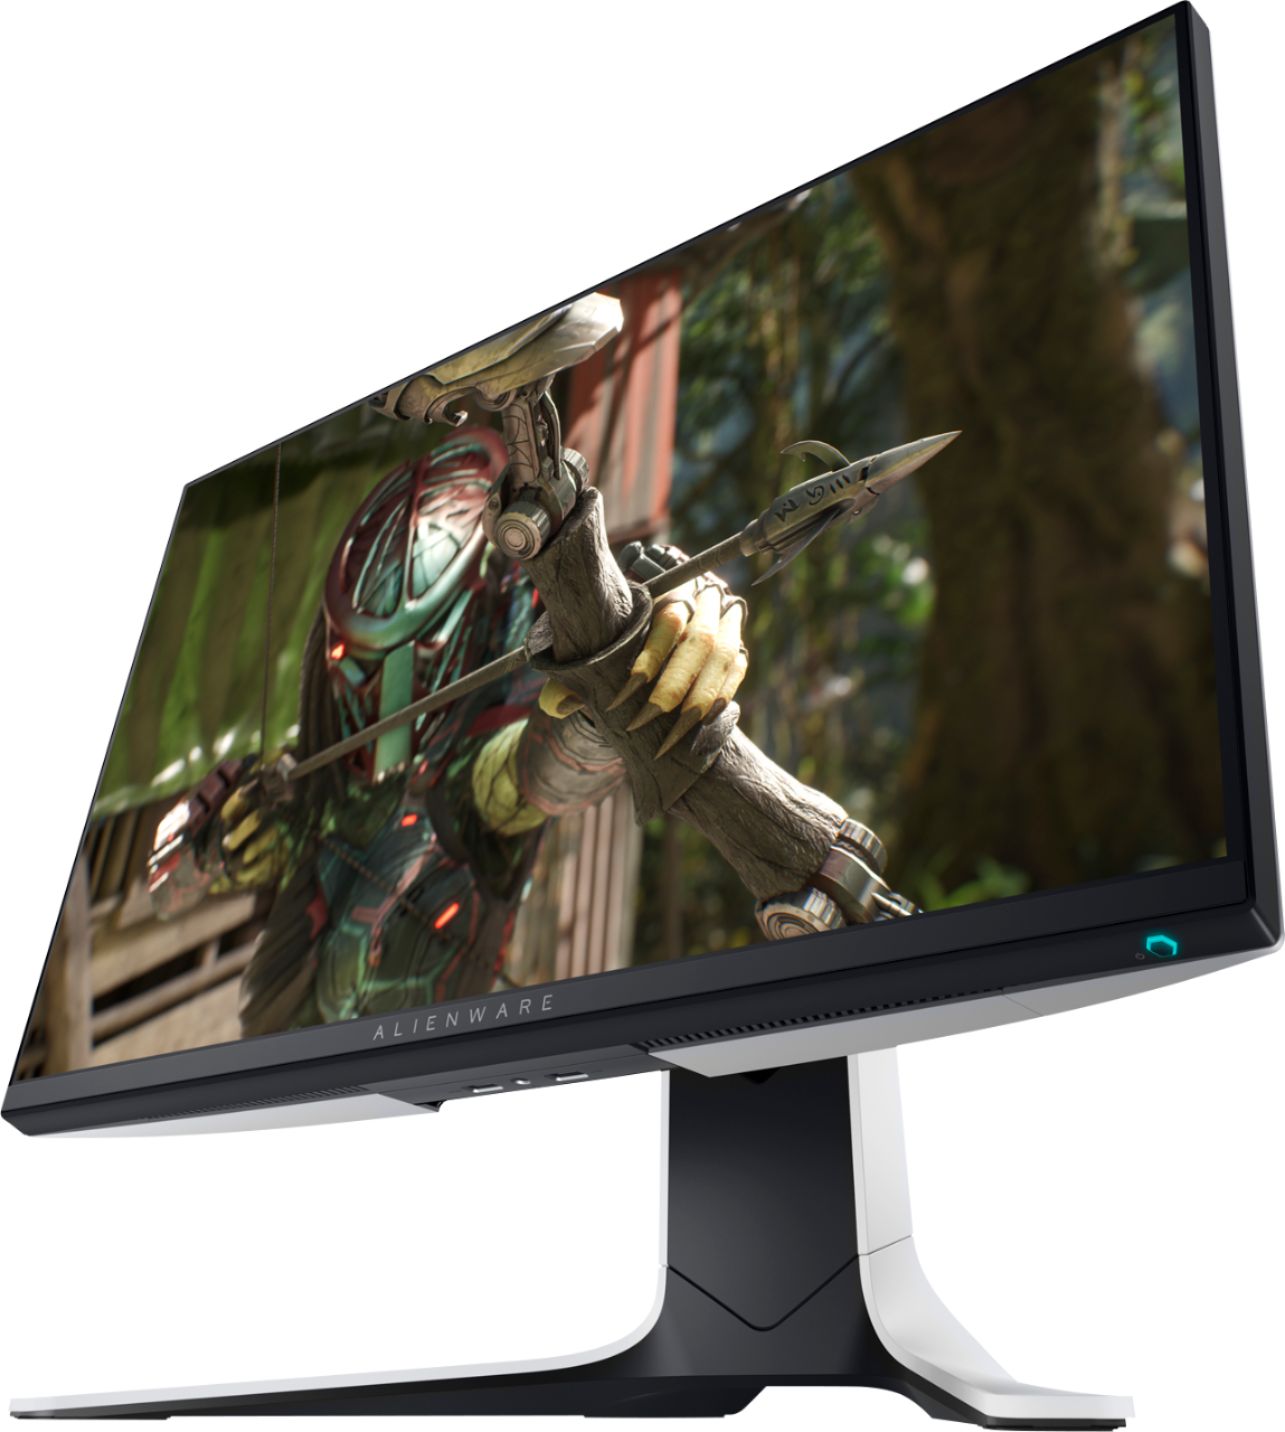  Alienware AW2523HF Gaming Monitor - 24.5-inch